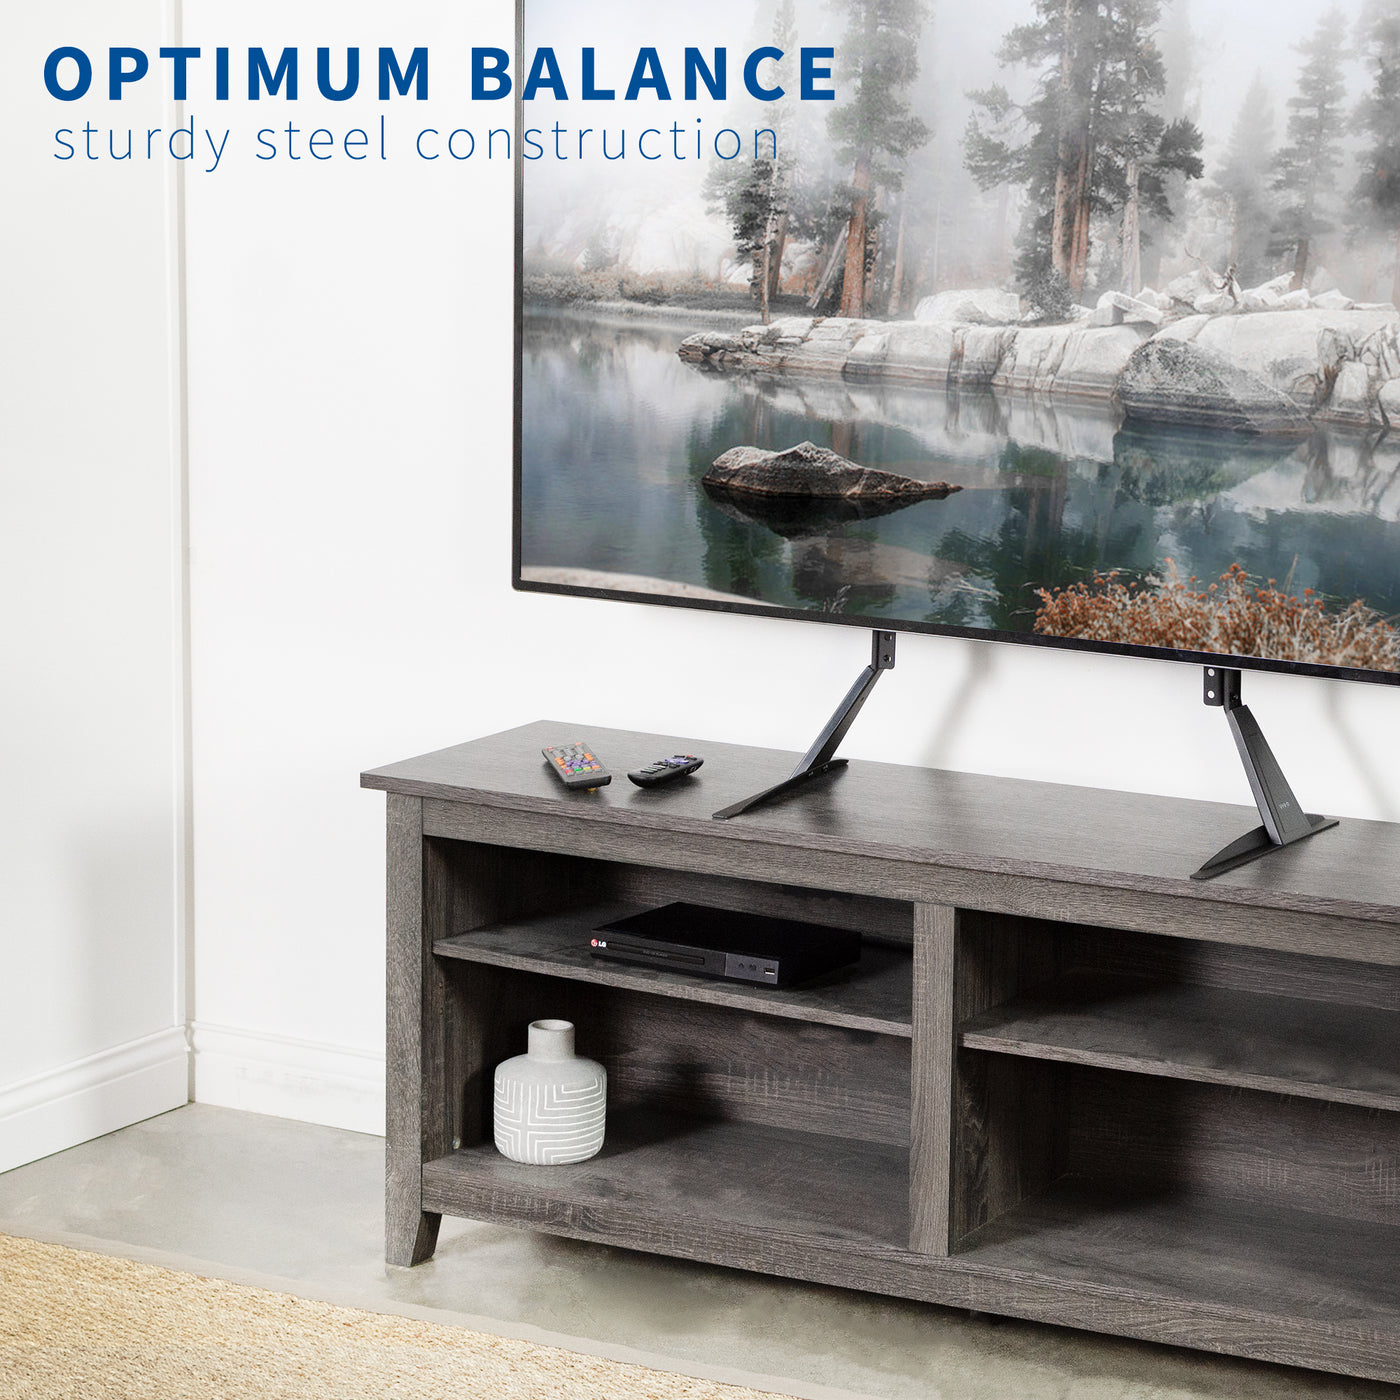 Sturdy steel-constructed TV stand provides optimum support.